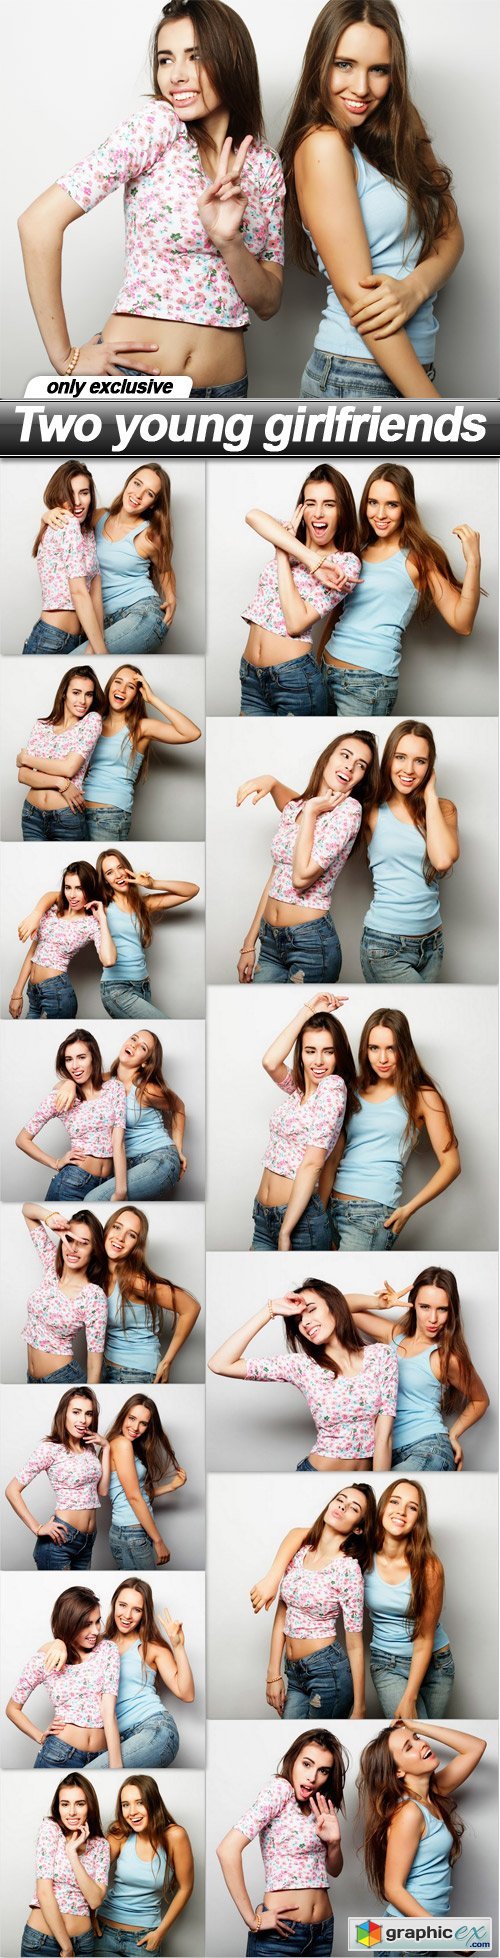 Two young girlfriends - 15 UHQ JPEG